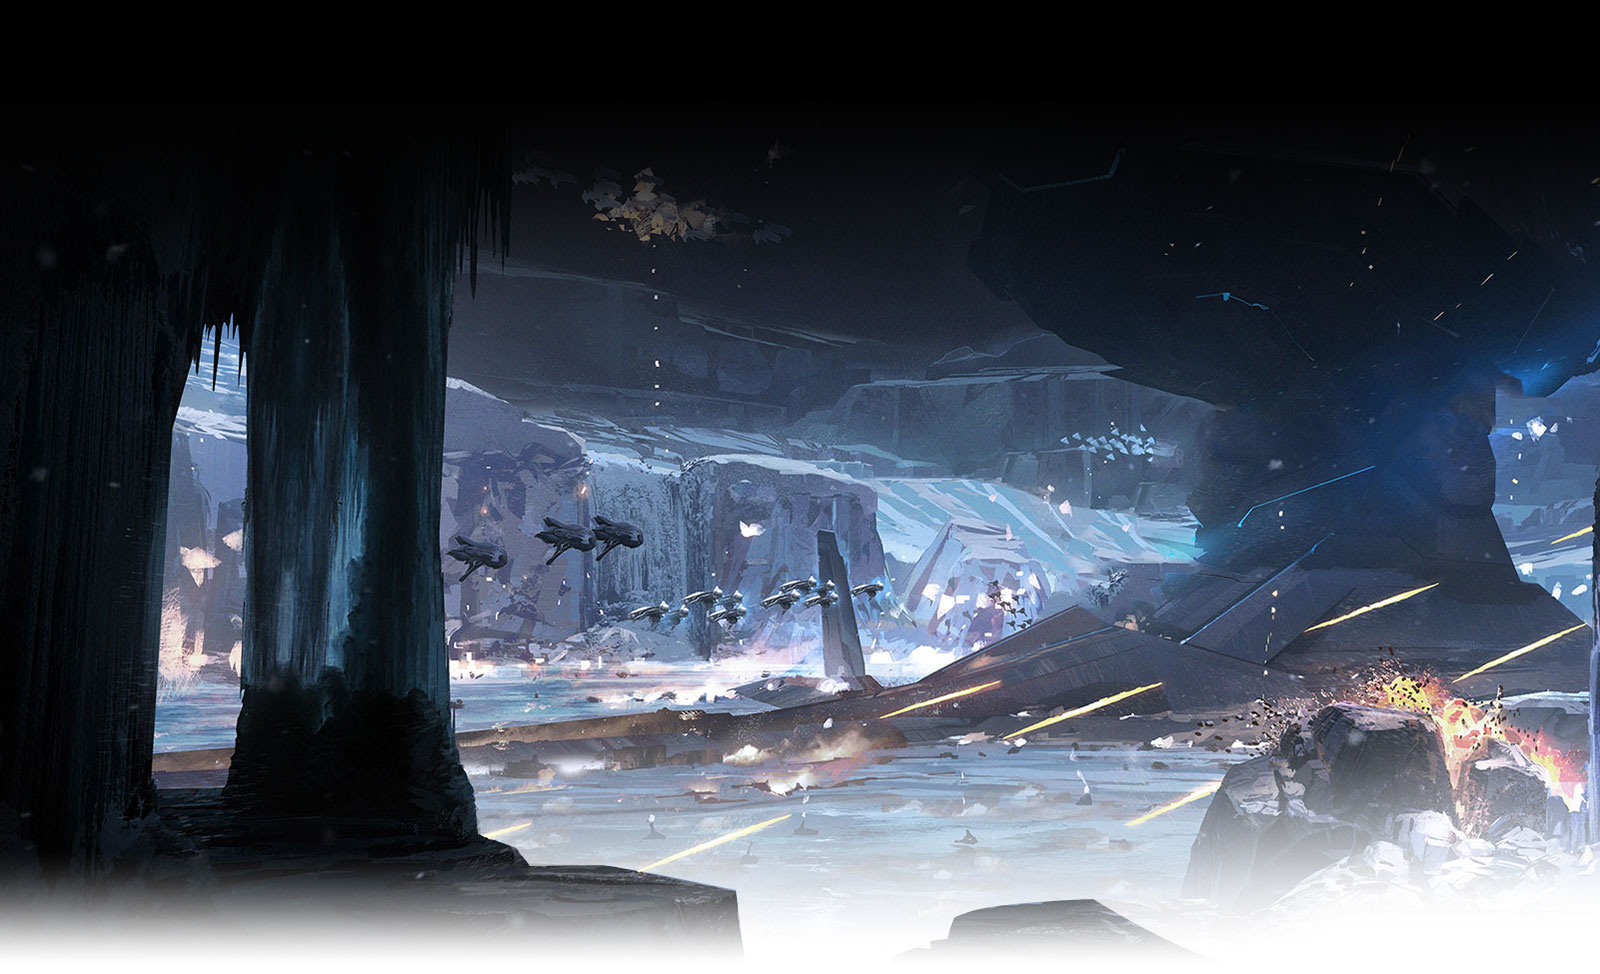 Spacecraft fly through an icy cave environment battlefield in Halo 5: Guardians concept art